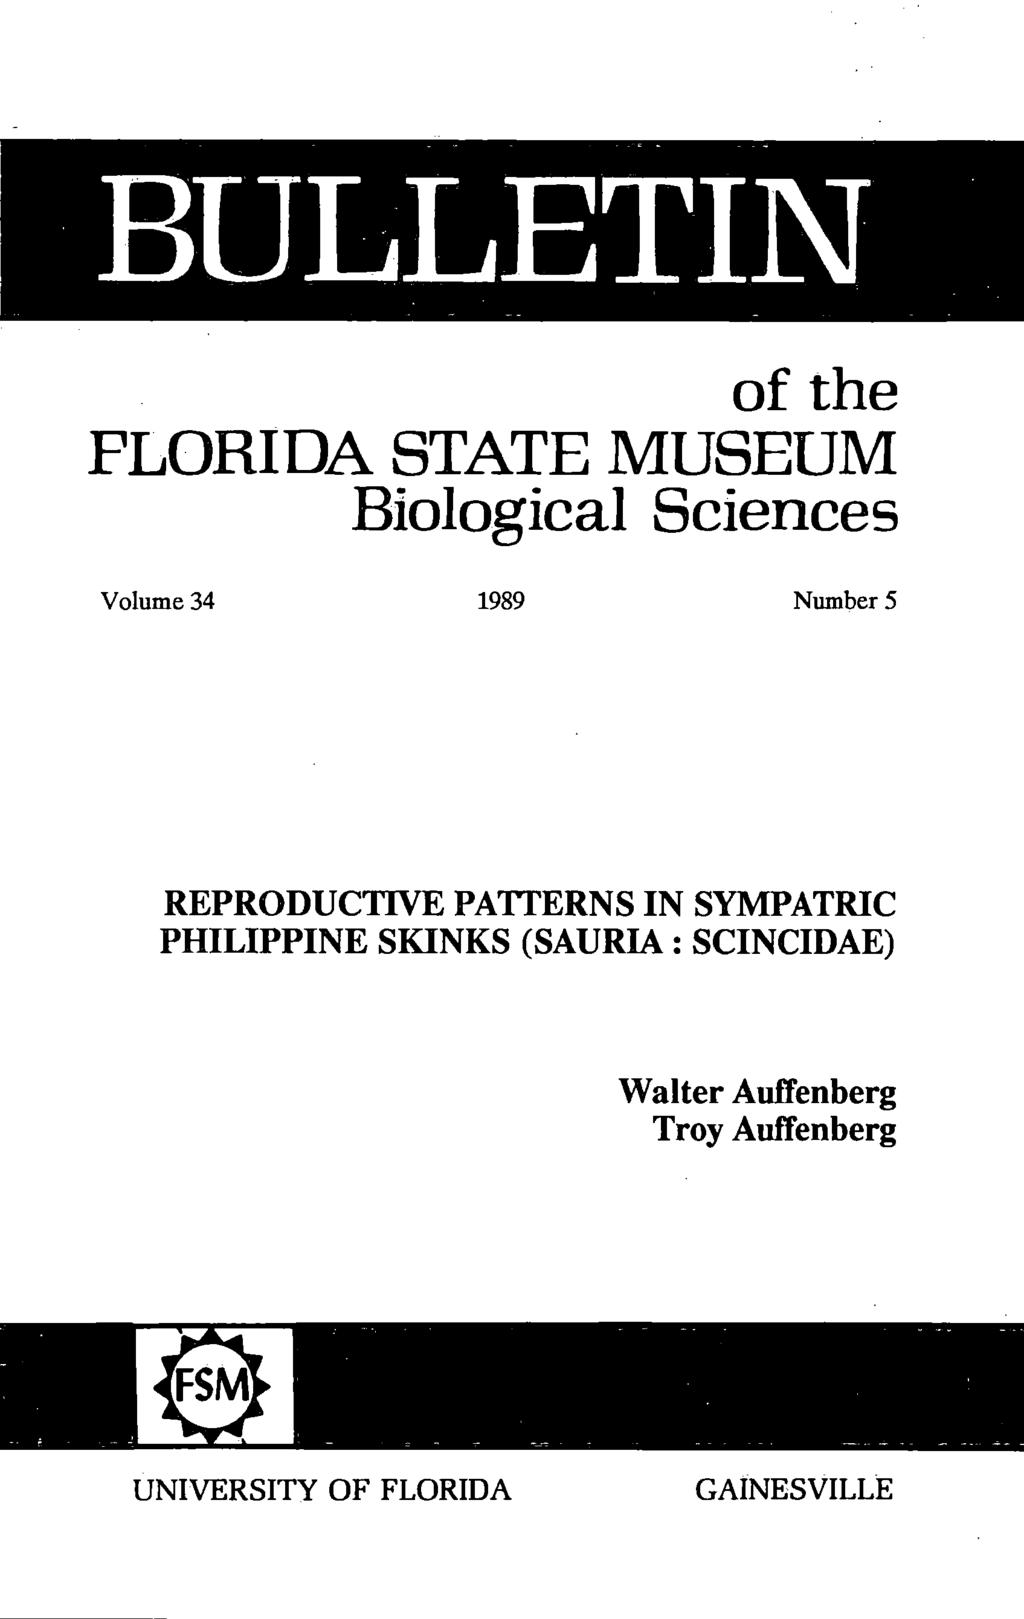 BULLETIN of the FLORIDA STATE MUSEUM Biological Sciences Volume 34 1989 Number 5 REPRODUCTIVE PATTERNS IN